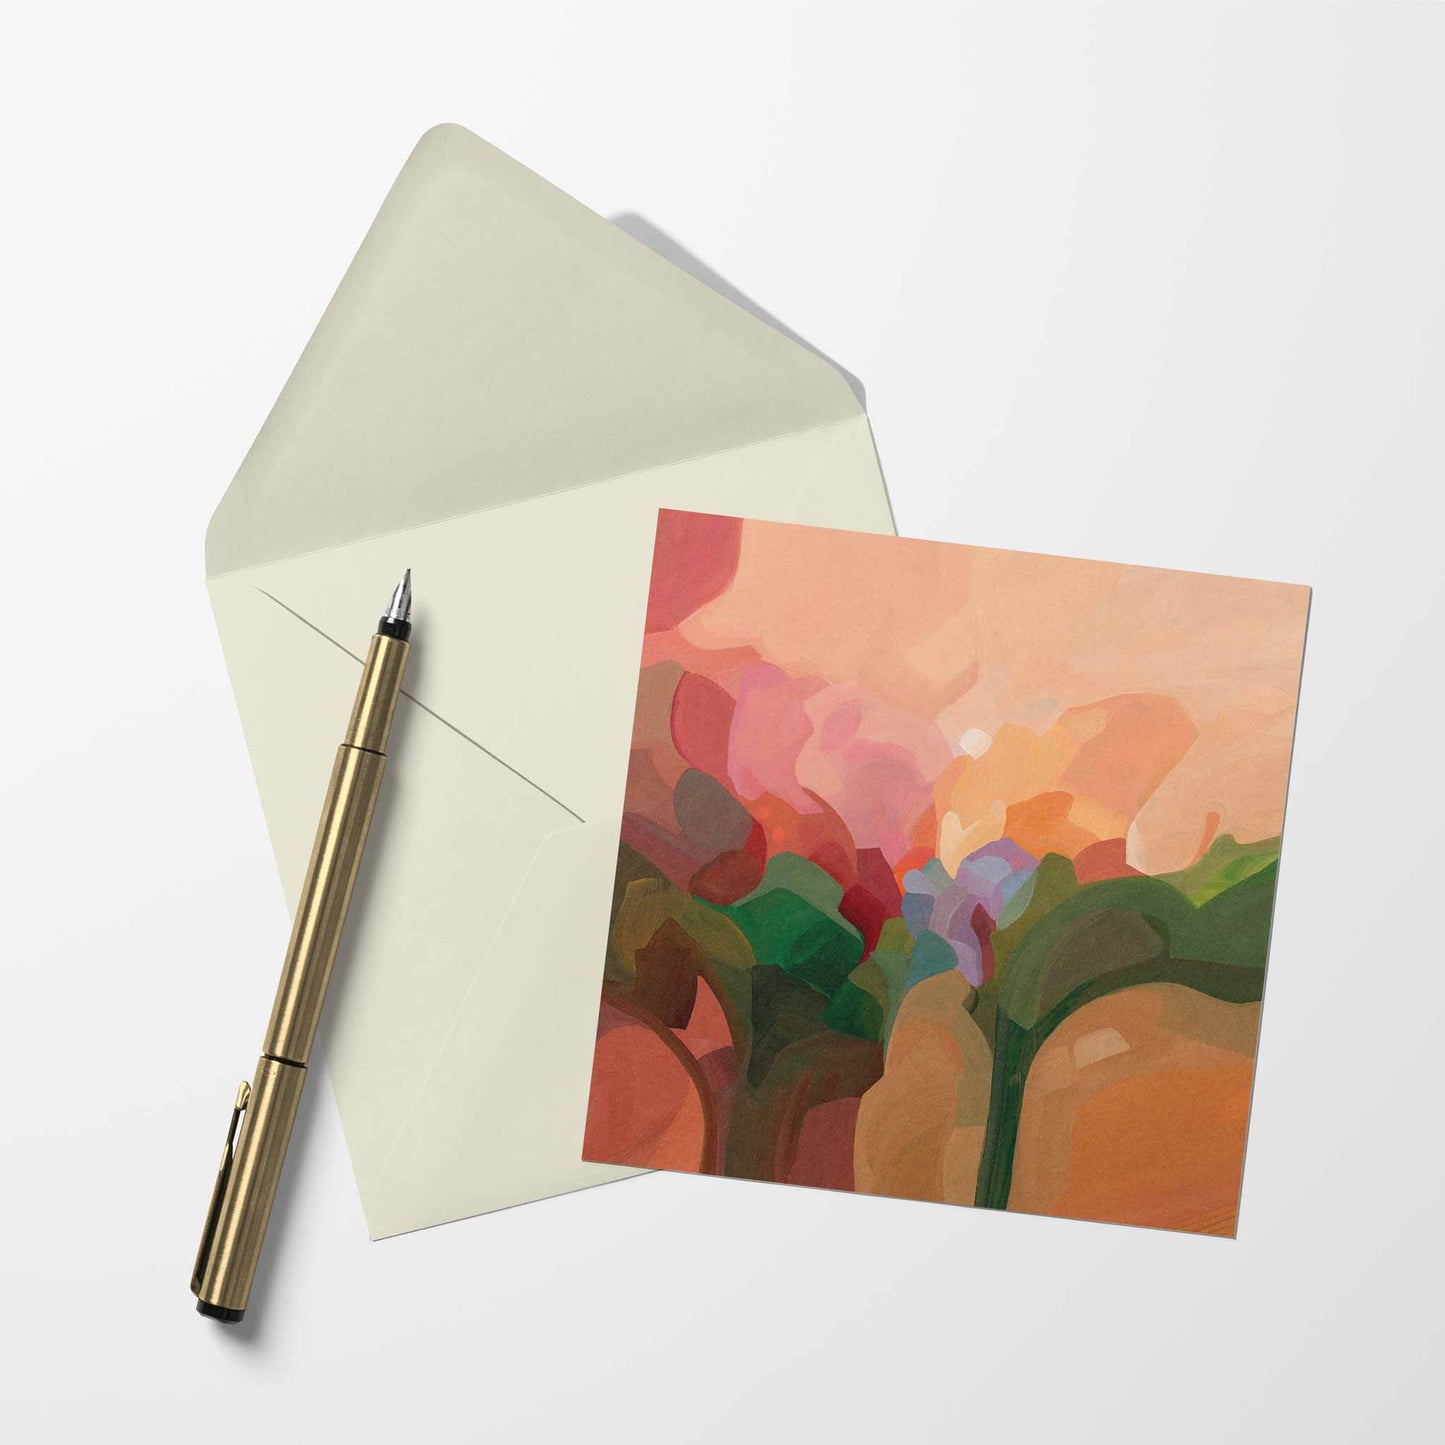 blank art card with peach abstract artwork and cream envelope